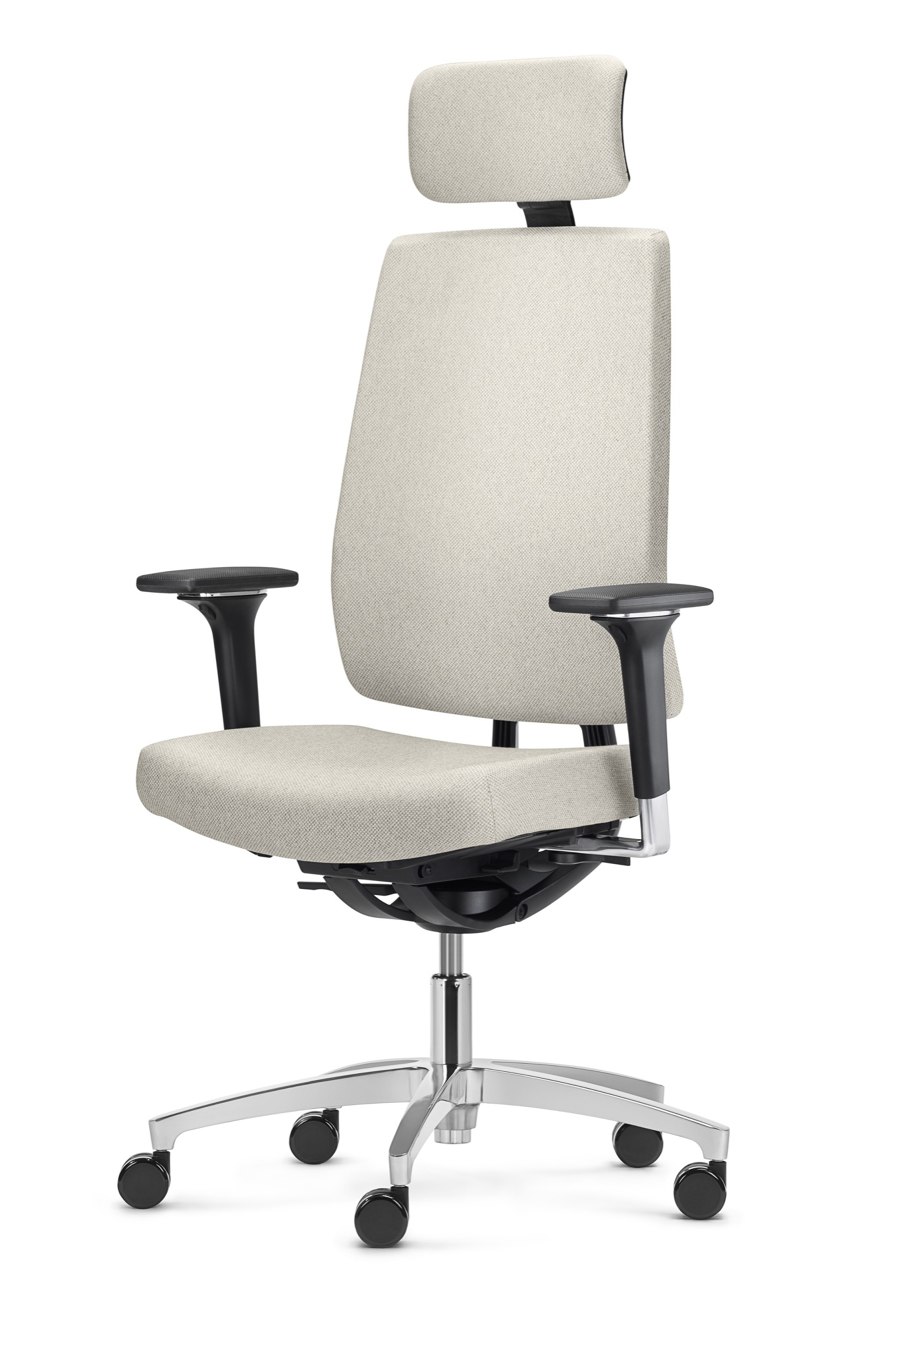 It's Automatic: Dauphin unveils the flexible office chair Indeed automatic | Novedades